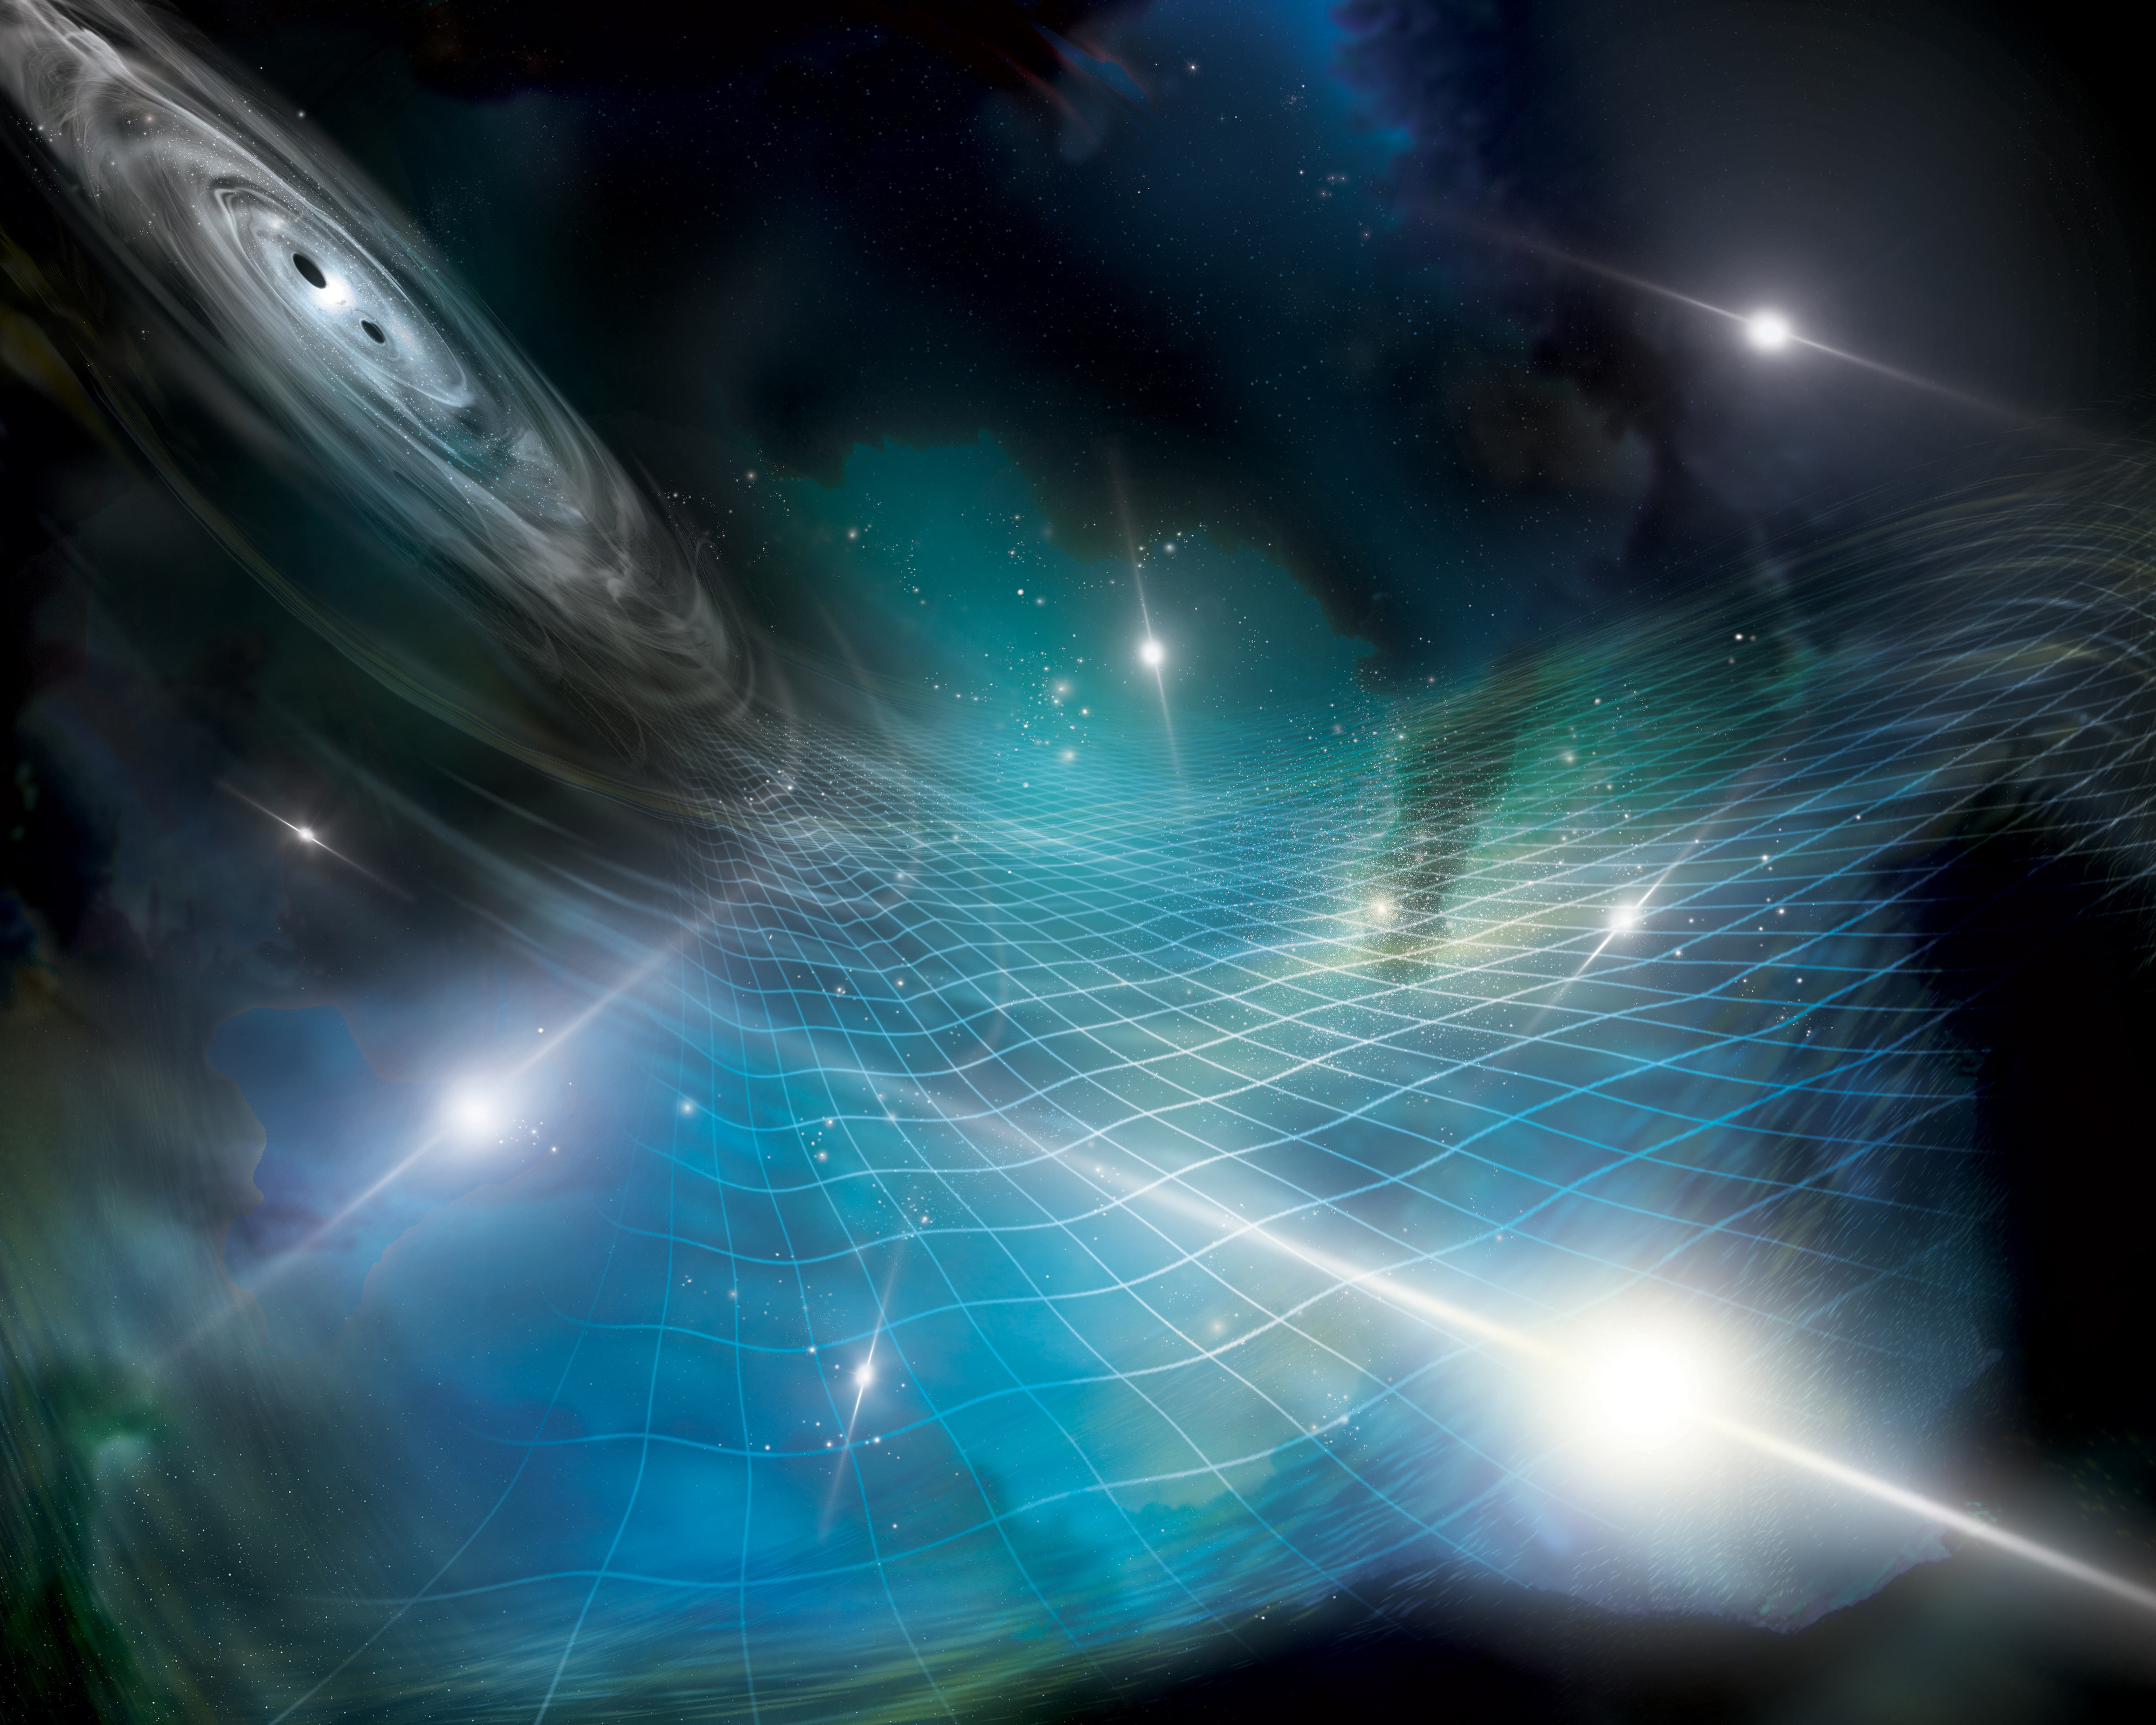 An artist’s interpretation of an array of pulsars being affected by gravitational ripples produced by a supermassive black hole binary in a distant galaxy. Photo: Aurore Simonnet for the NANOGrav Collaboration